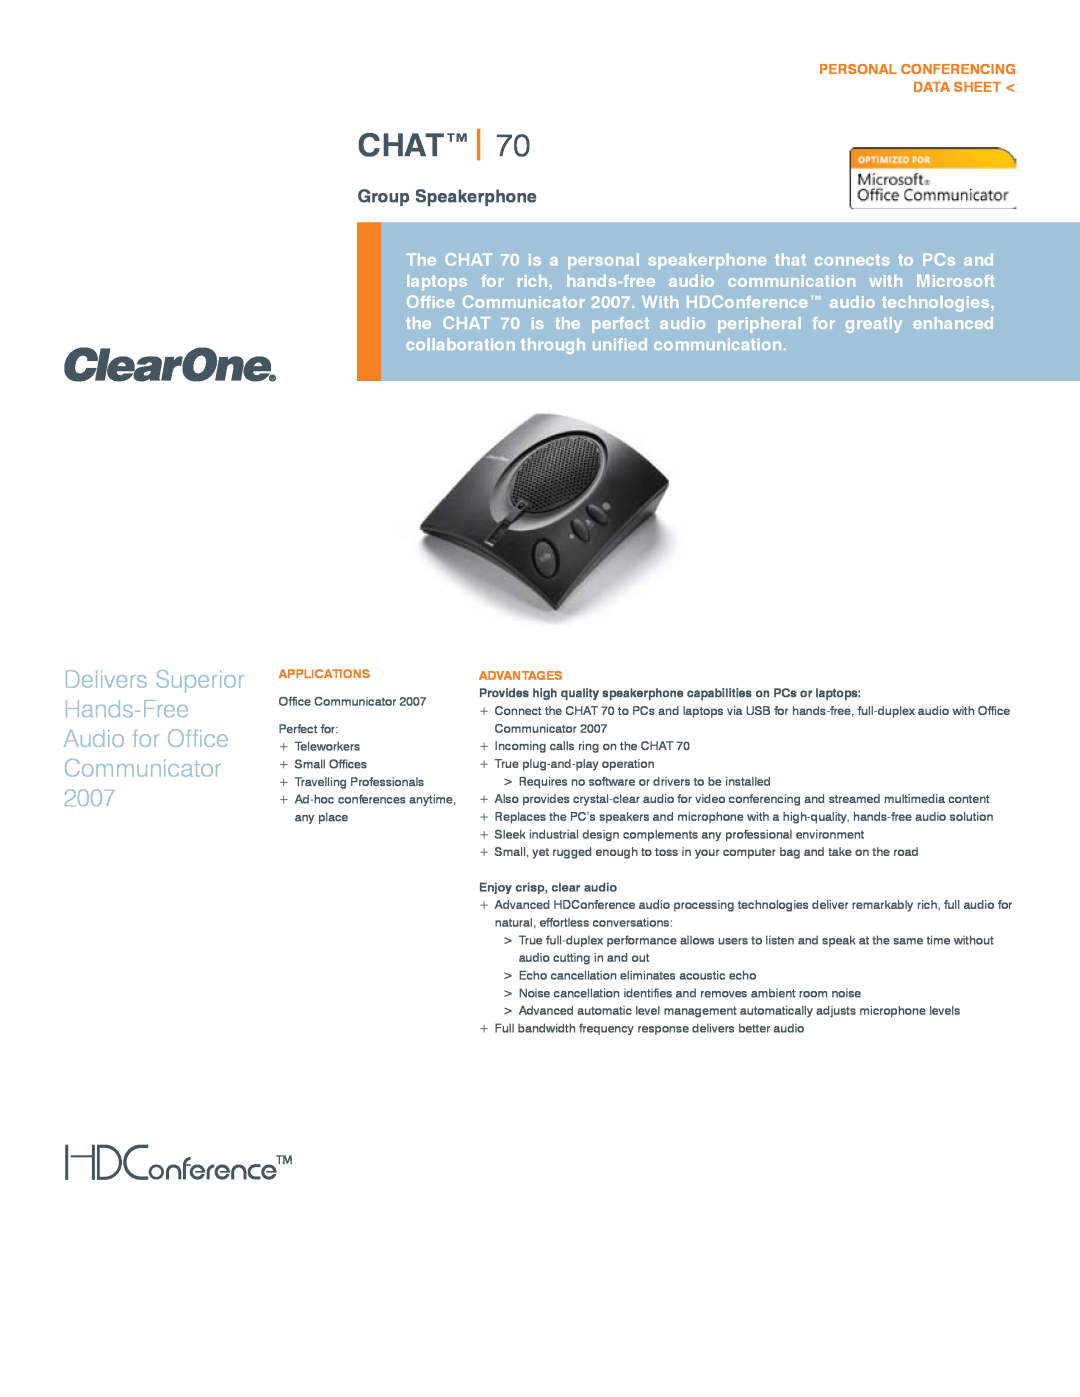 ClearOne comm 70 manual Personal Conferencing Data Sheet, Chat, Group Speakerphone, Applications, Advantages 